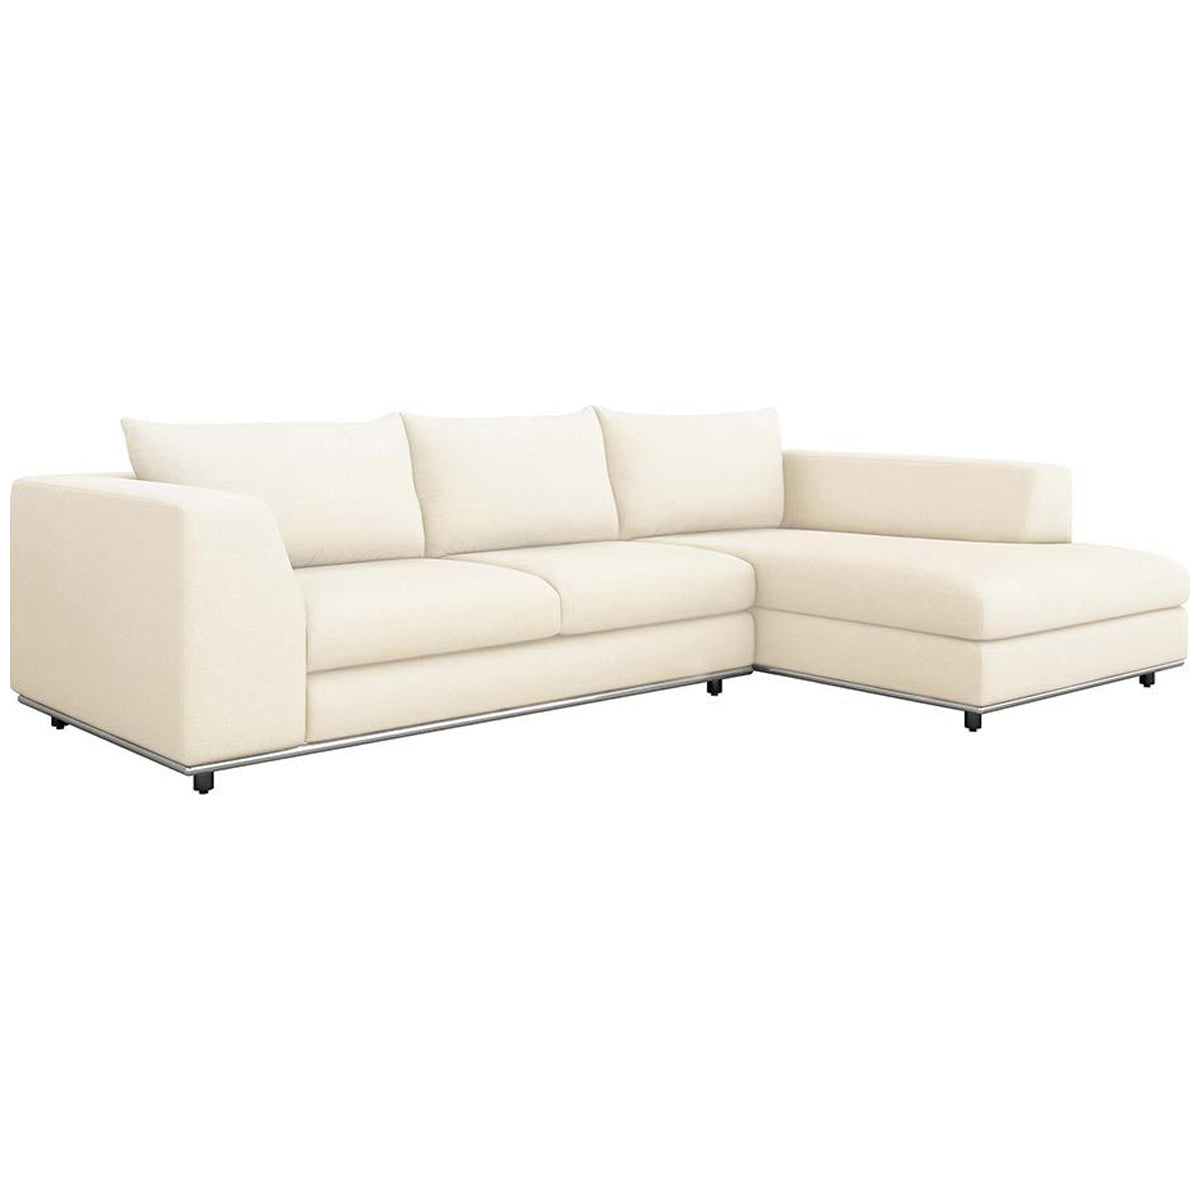 Interlude Home Comodo Chaise 2-Piece Sectional - Pure